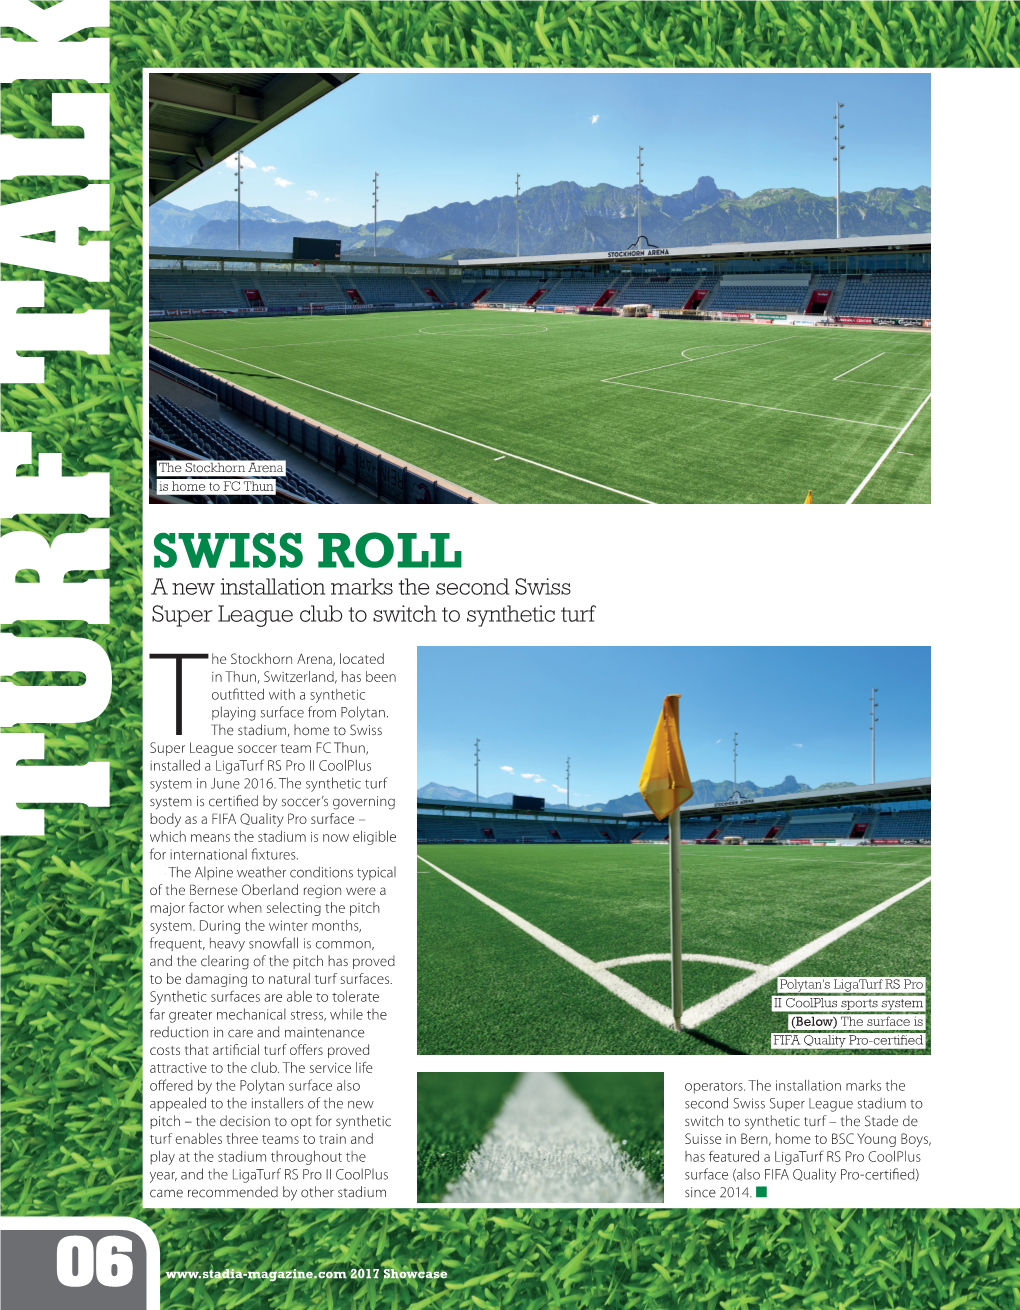 SWISS ROLL a New Installation Marks the Second Swiss Super League Club to Switch to Synthetic Turf